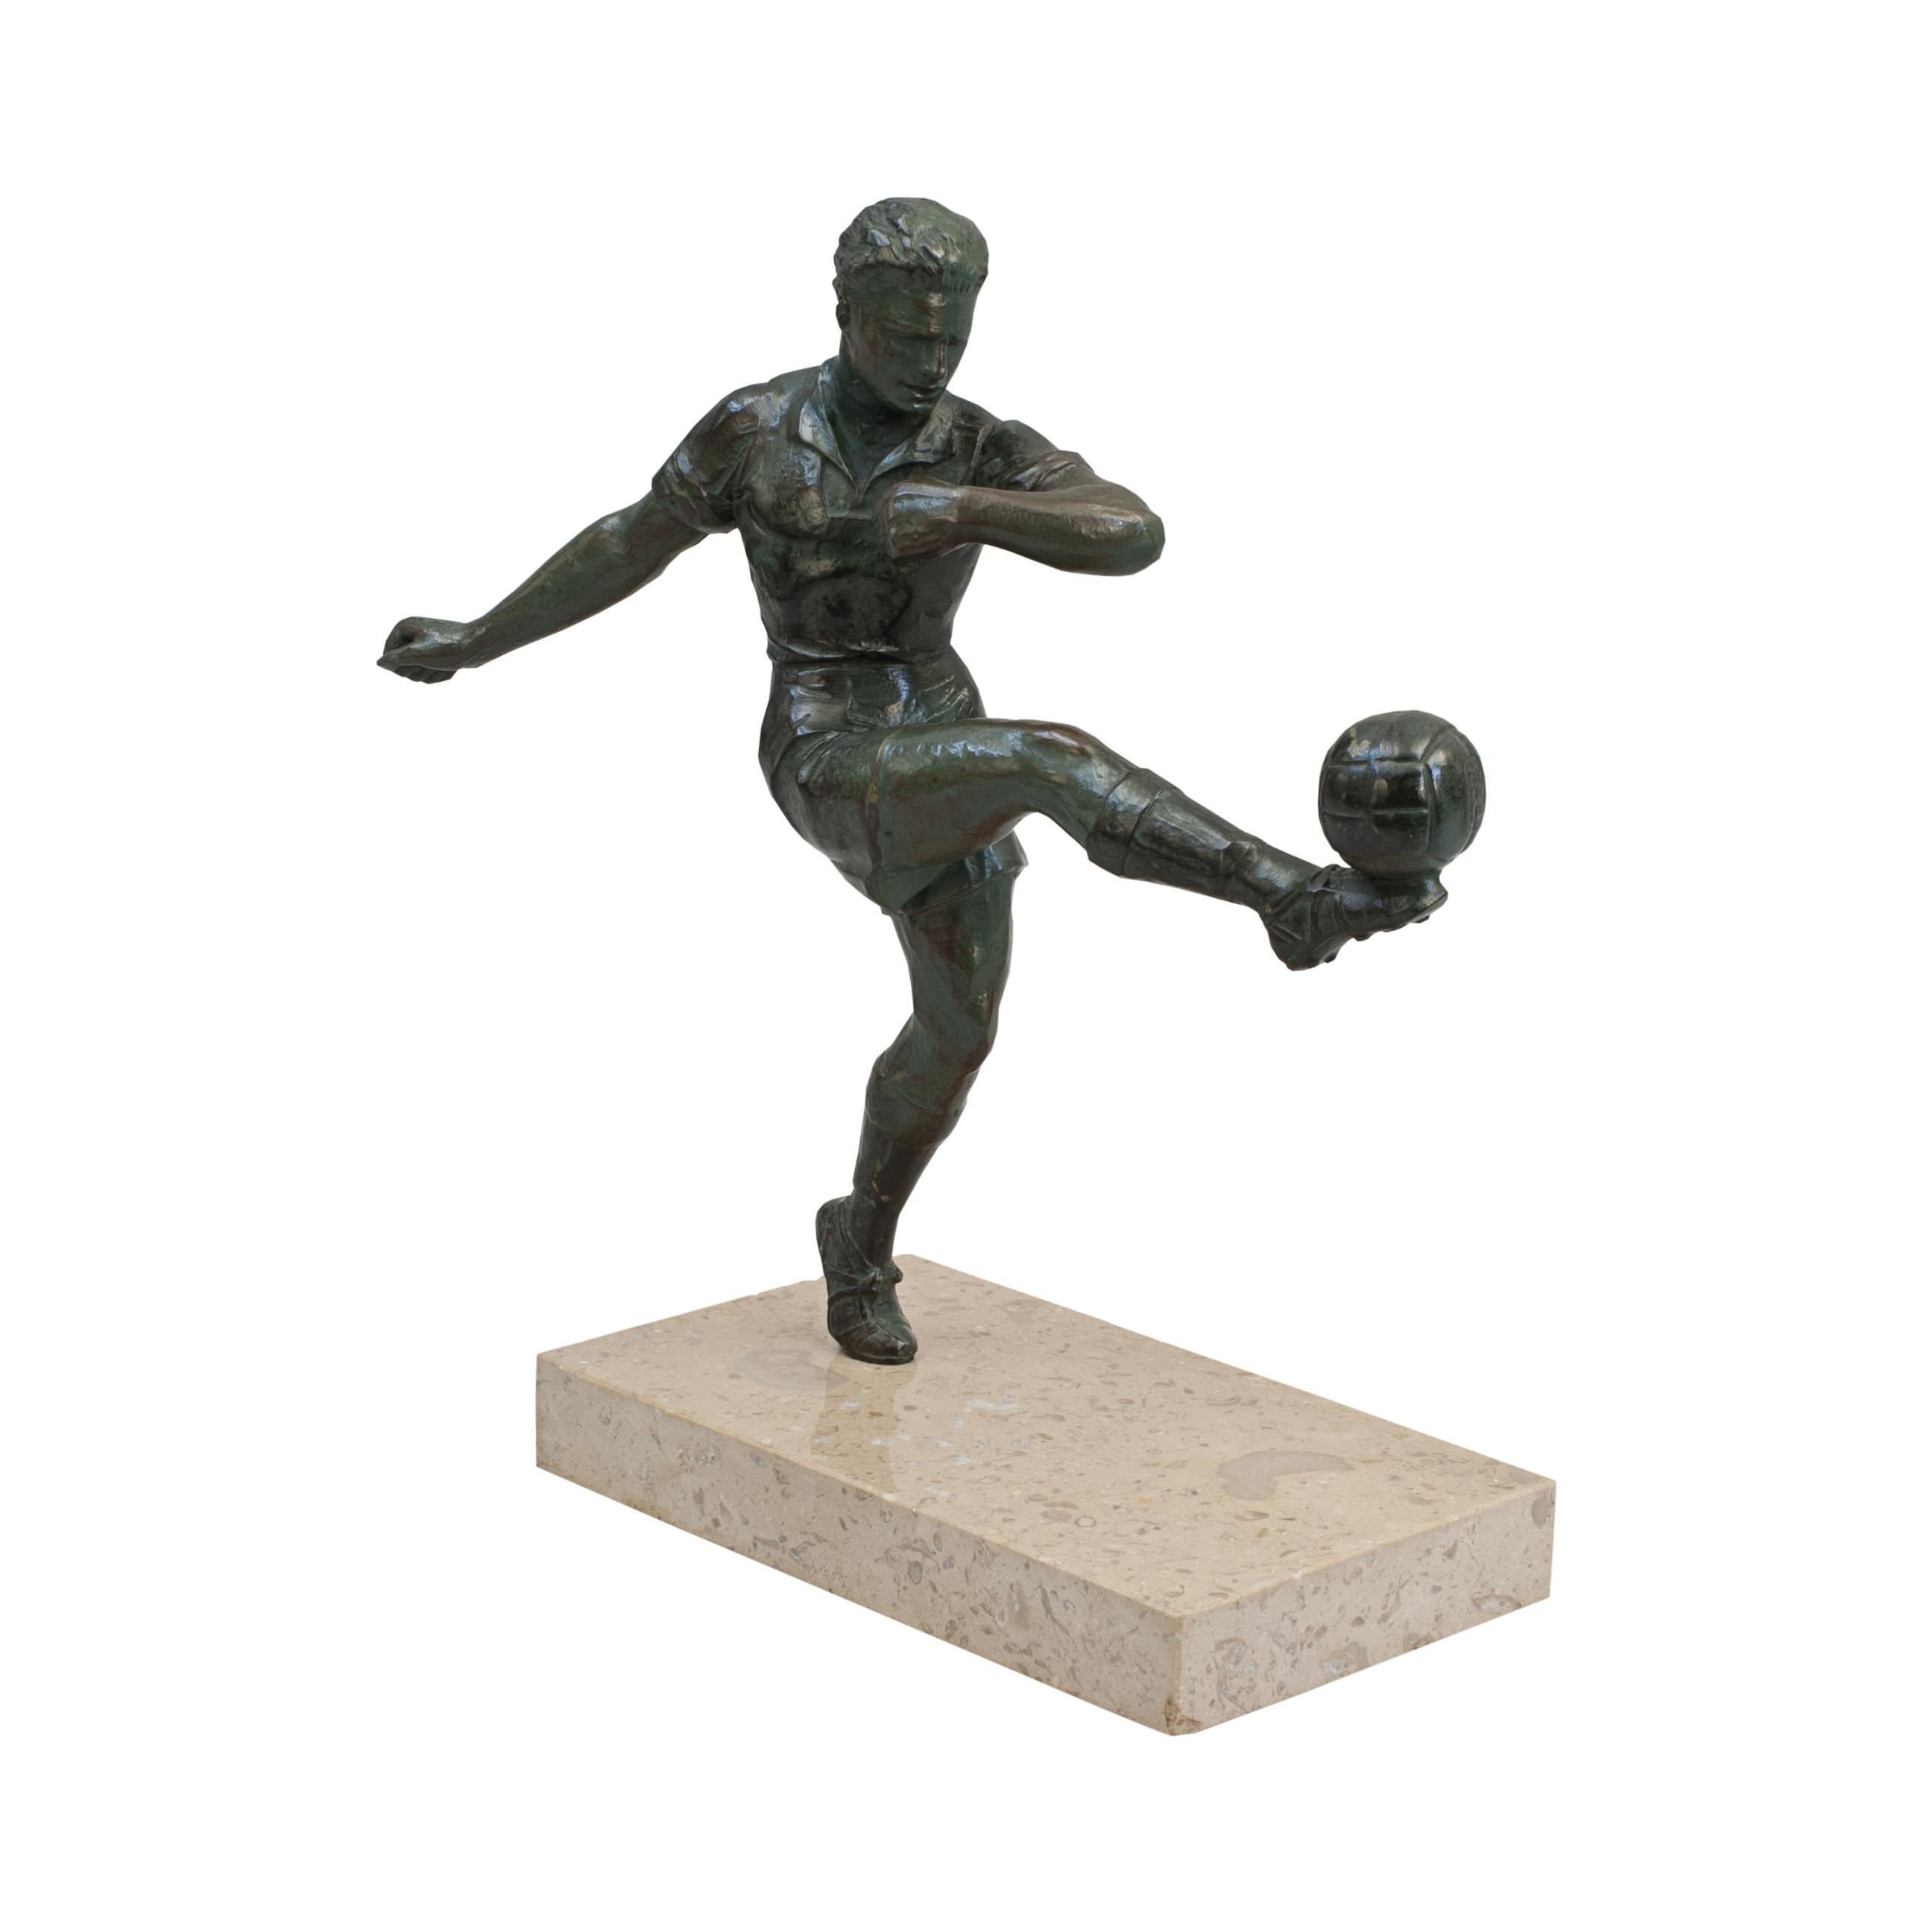 Antique bronzed spelter football figure.
A very nice French Art Deco style spelter figure of a footballer. The footballer is kicking a football with his right foot and has a verdigris finish to look like weathered bronze. The figure is mounted on a